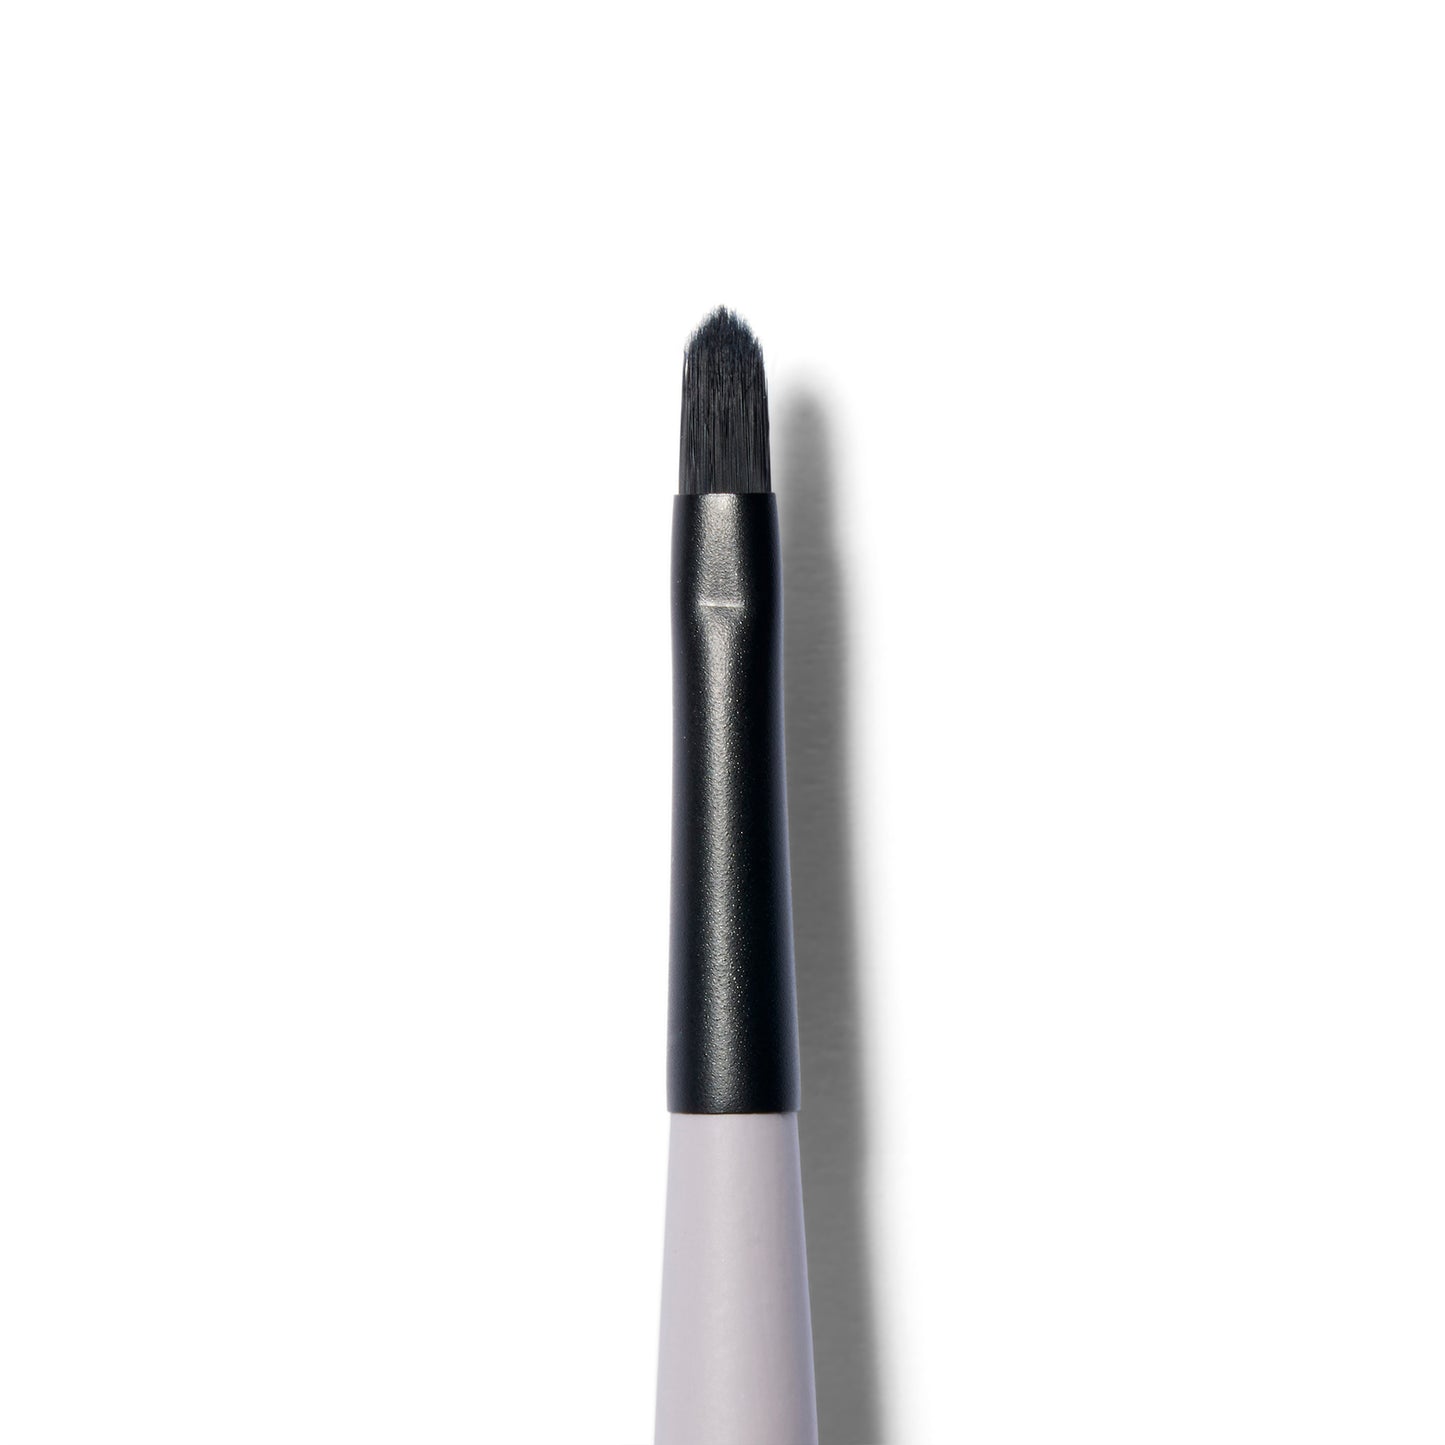 A close up of the  brush of the  fine tipped application brush. The brush hairs are black and slightly tapered.